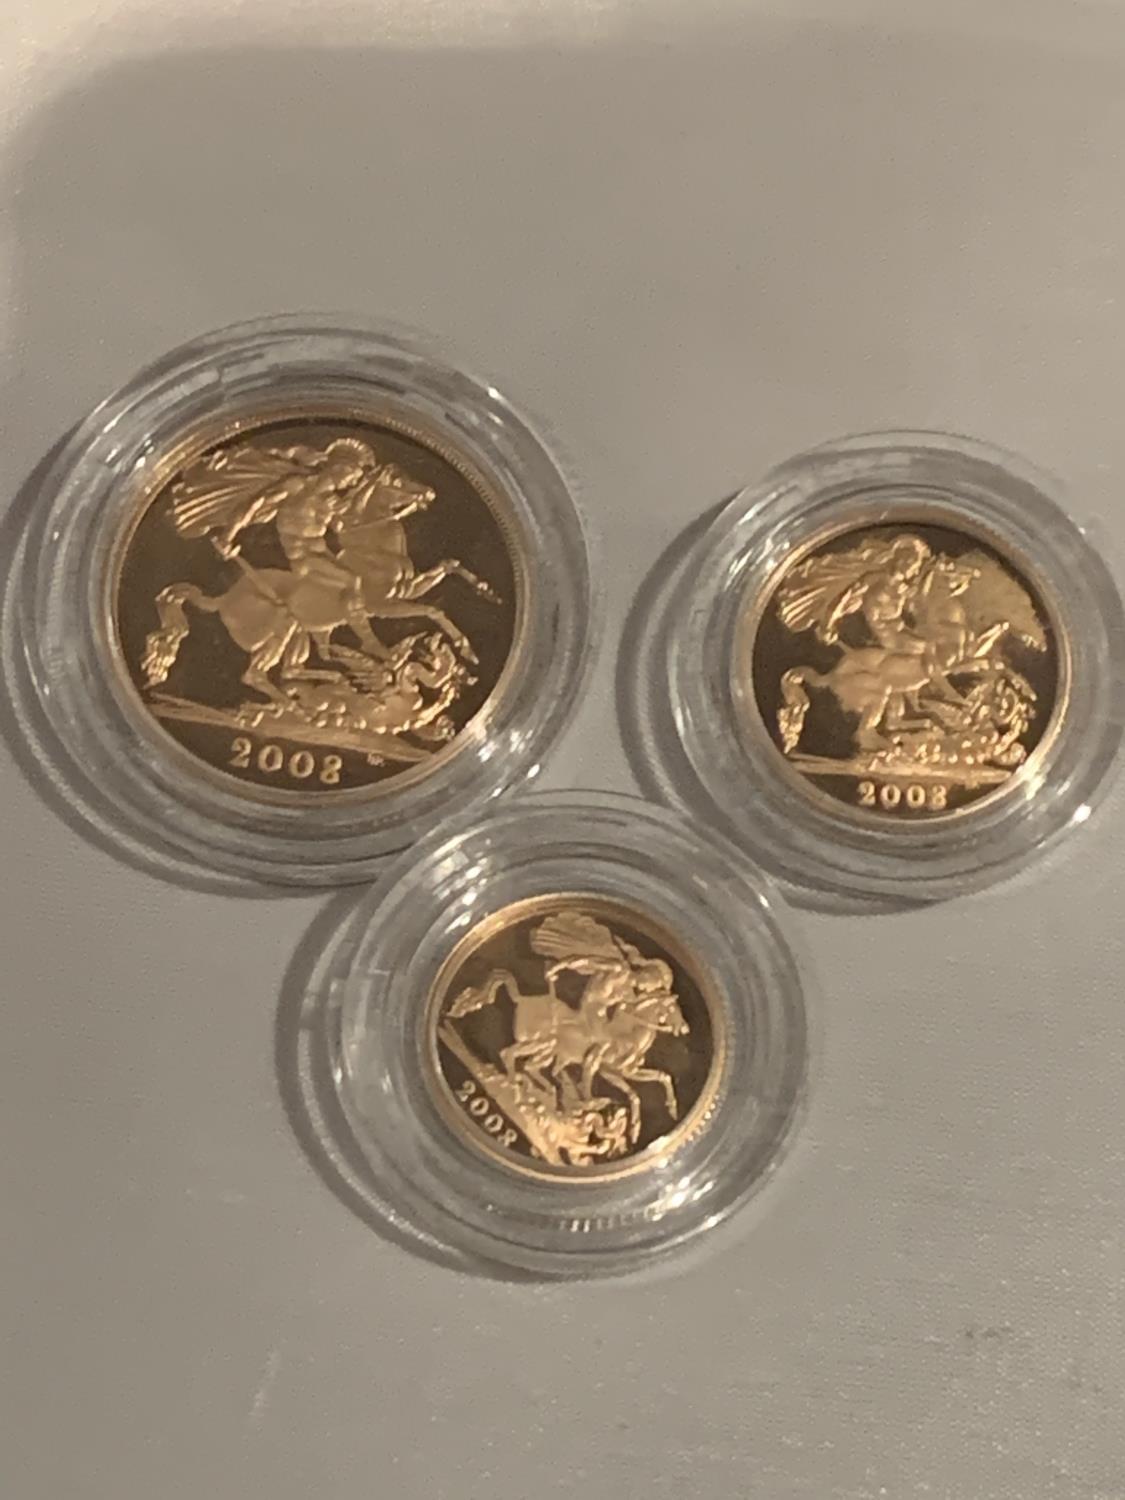 A 2008 THREE COIN GOLD PROOF SET, DOUBLE SOVEREIGN, SOVEREIGN AND HALF SOVEREIGN IN WOODEN - Image 2 of 4